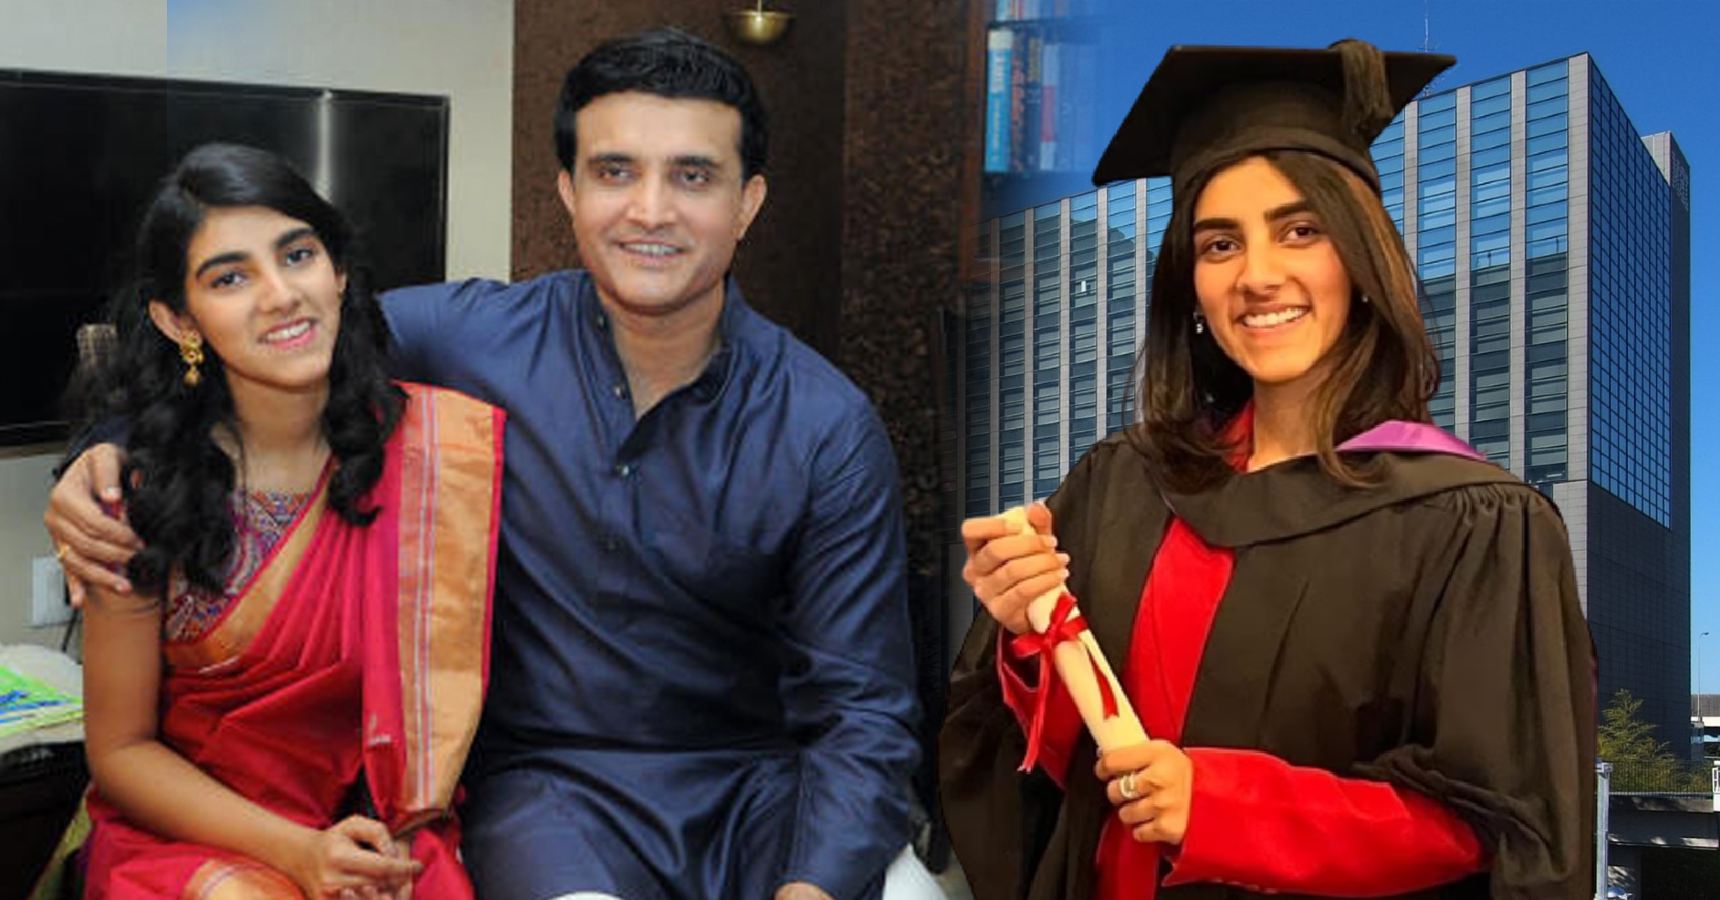 Sourav Ganguly says his daughter Sana Ganguly works in an artificial intelligence company